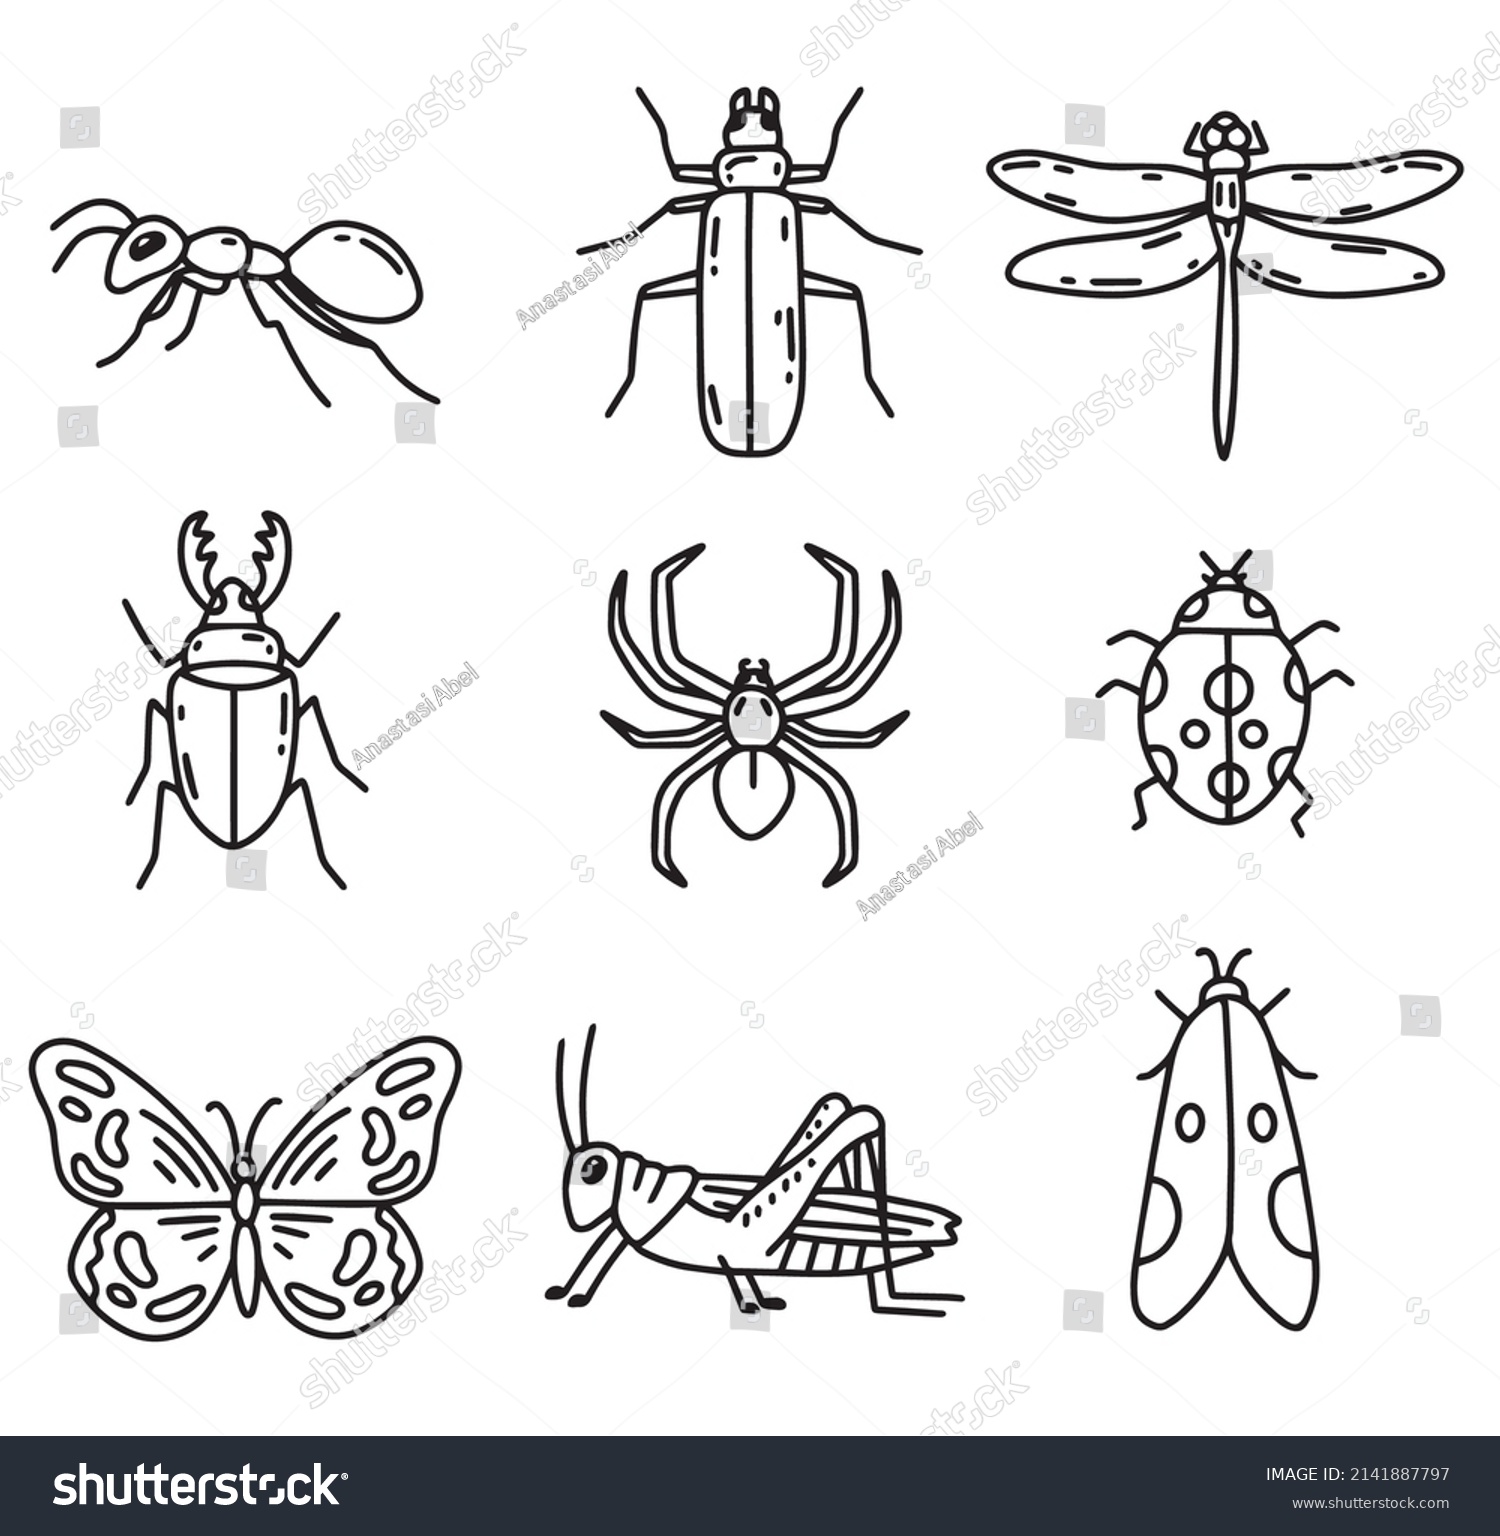 SVG of Vector set of doodle insects. Butterfly, spider, dor, locust, mole, beetle. Modern doodle illustrations of bugs. svg